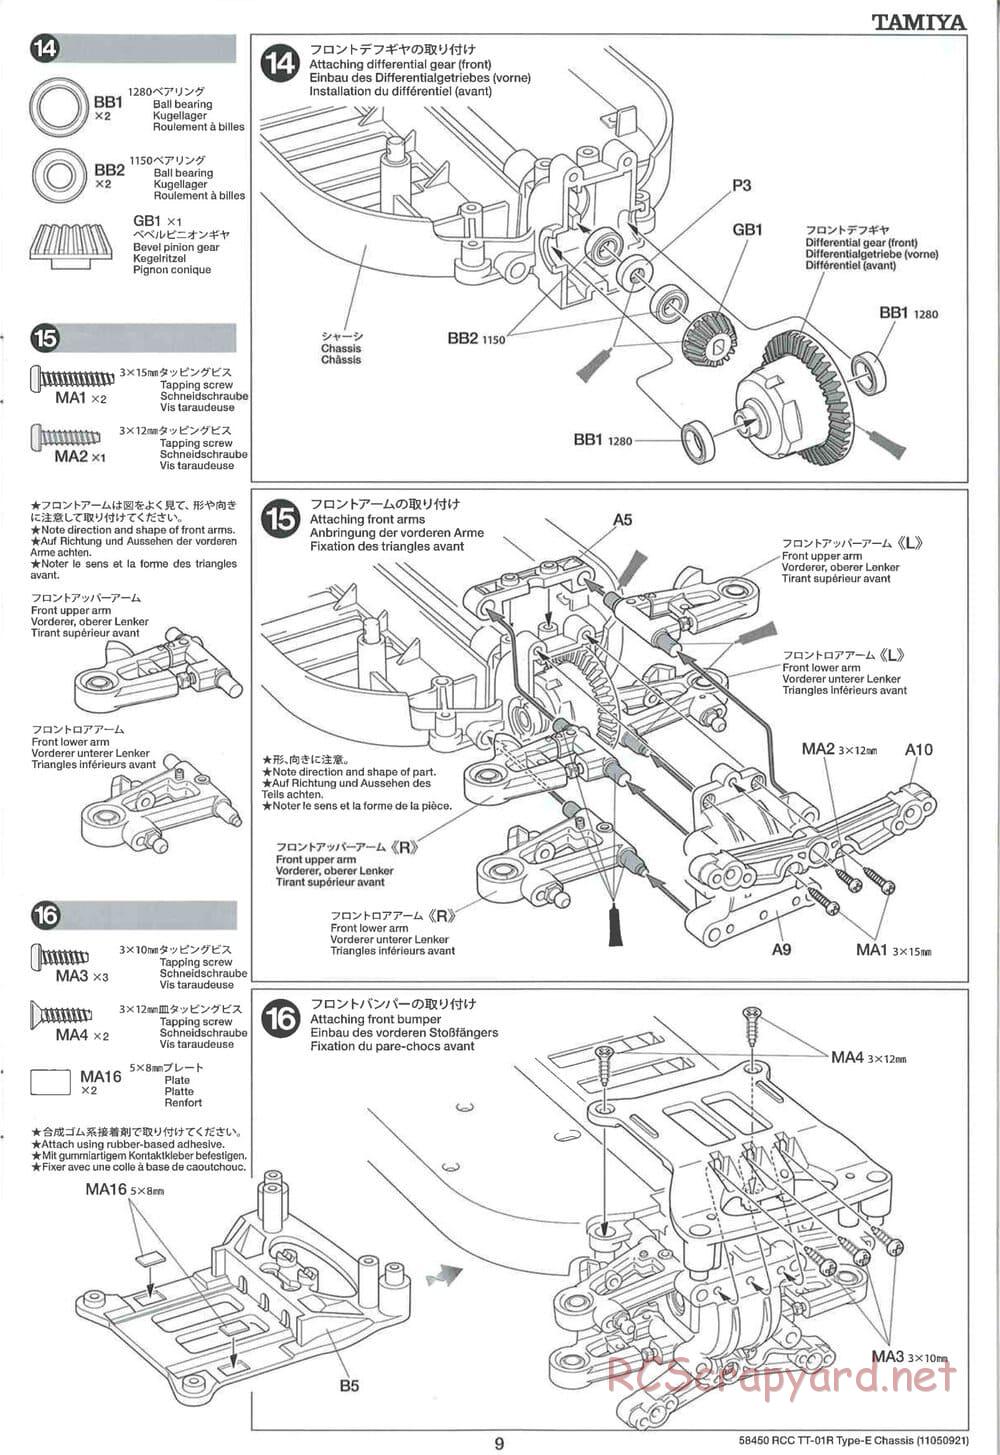 Tamiya - TT-01R Type-E Chassis - Manual - Page 9